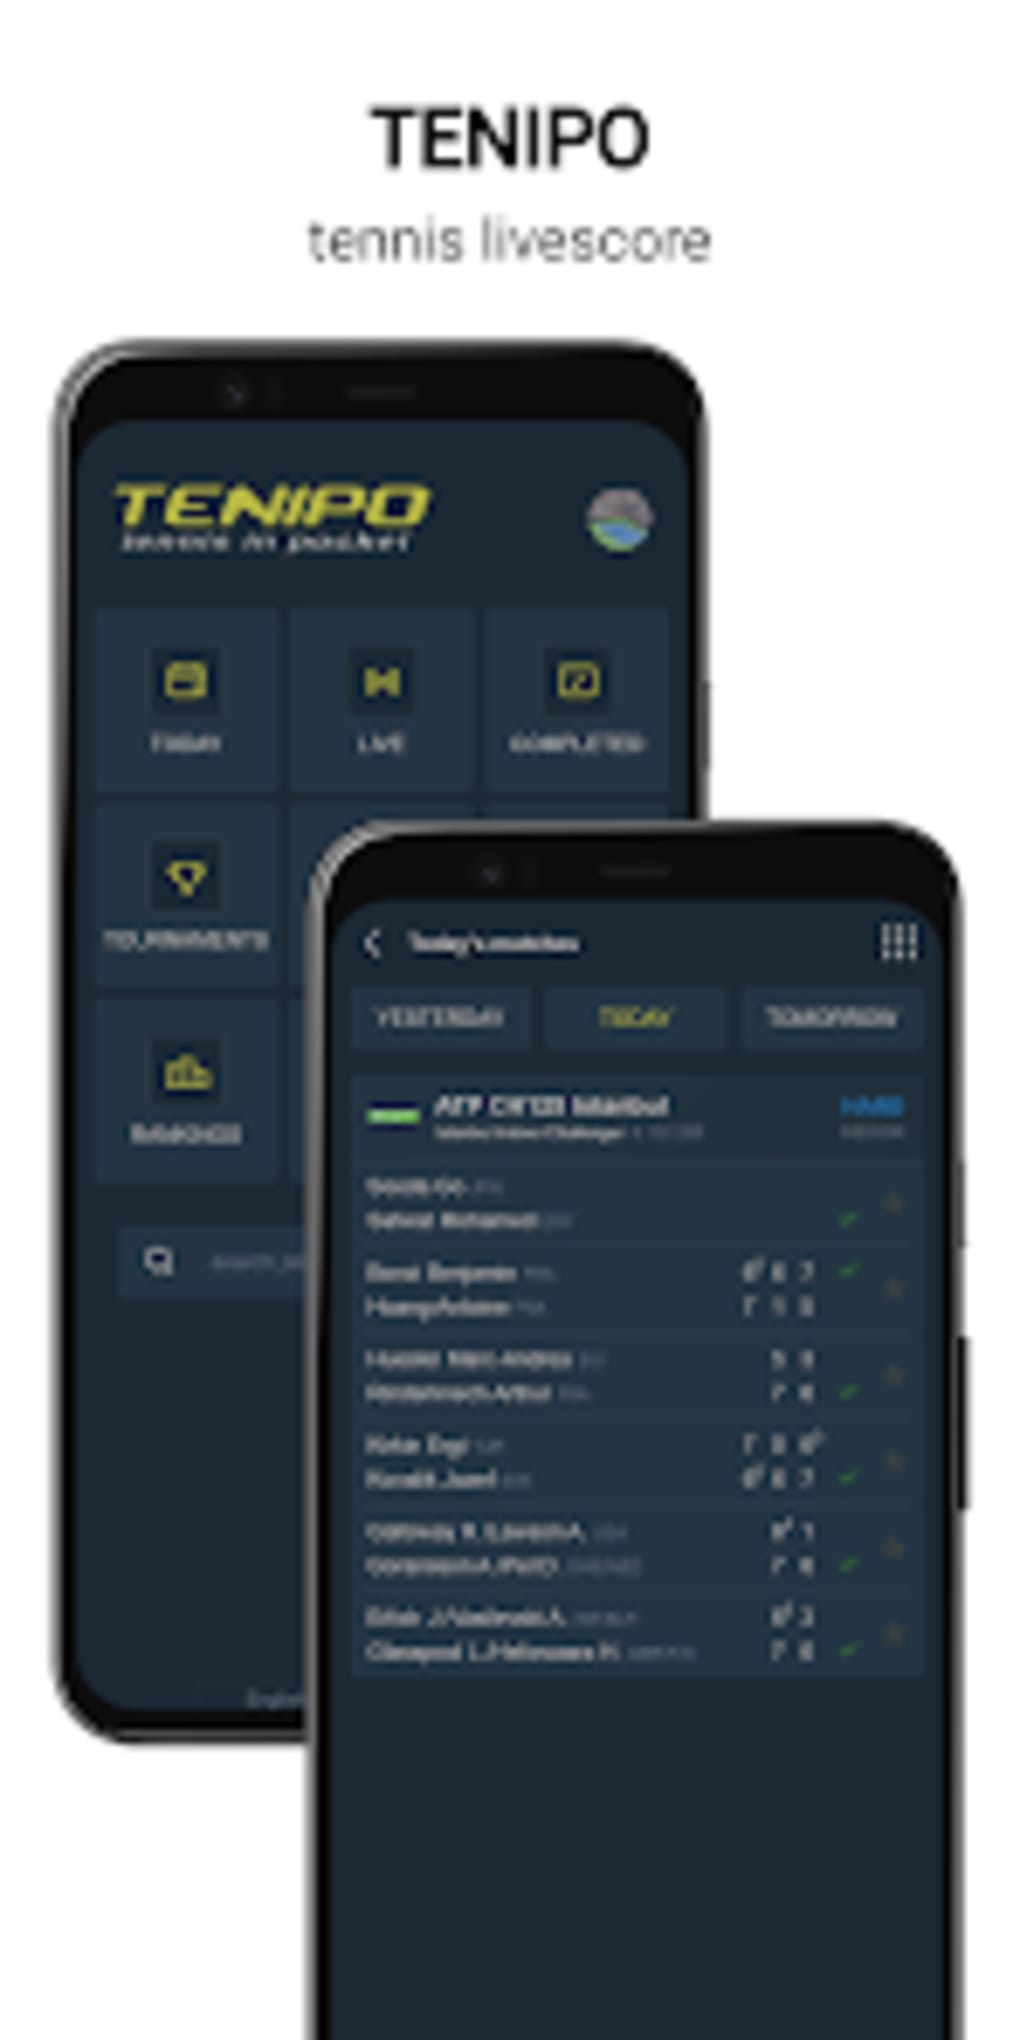 TENIPO - Tennis Livescore for Android